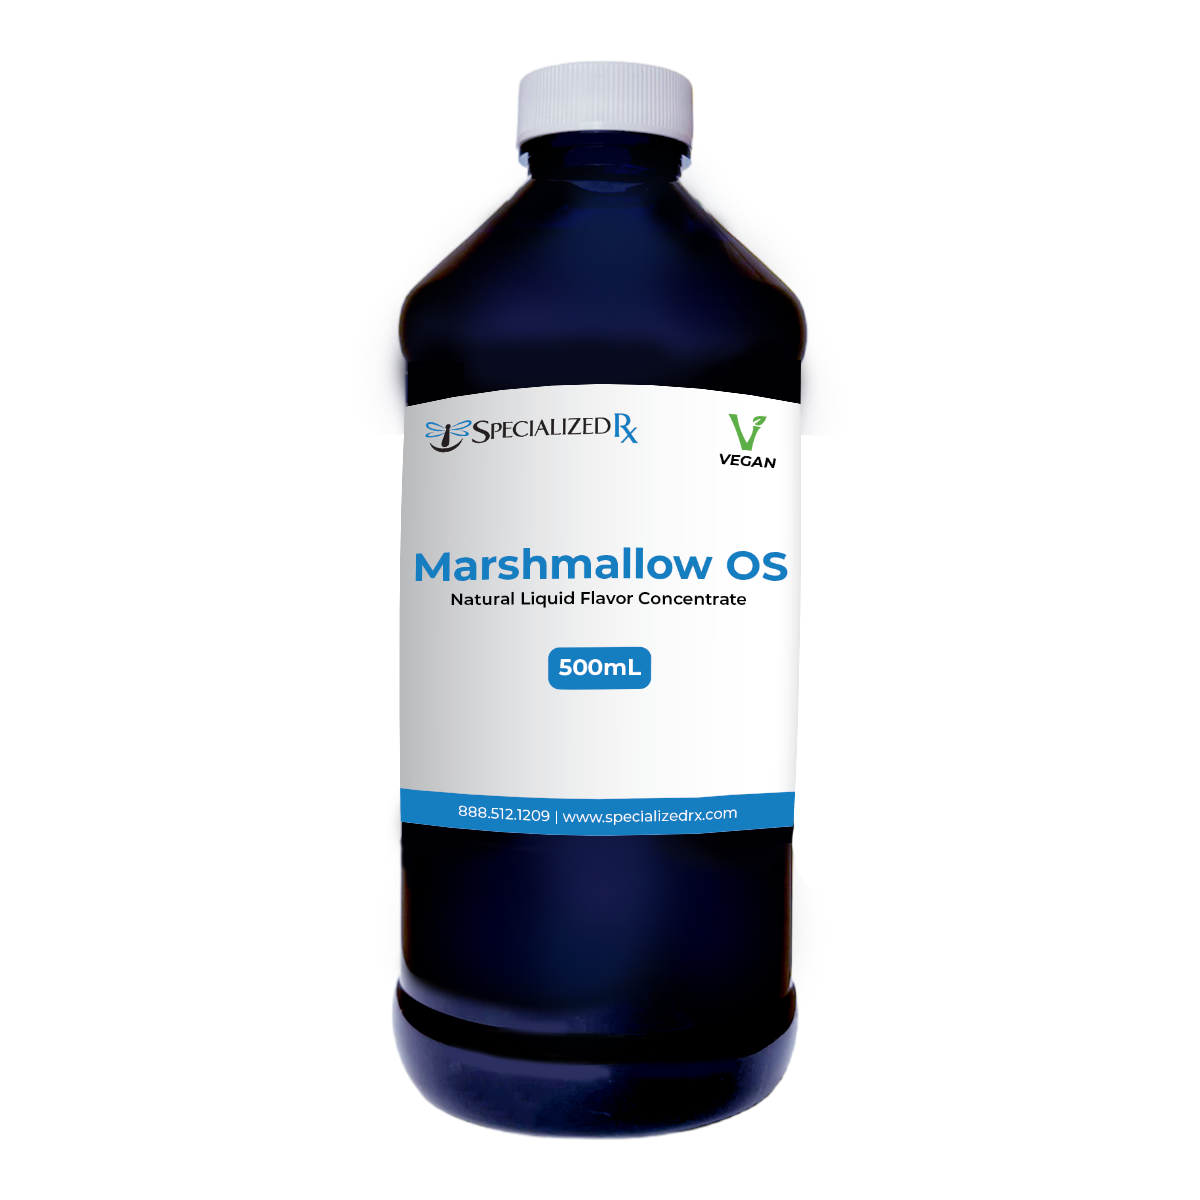 Marshmallow OS Natural Liquid Flavor Concentrate